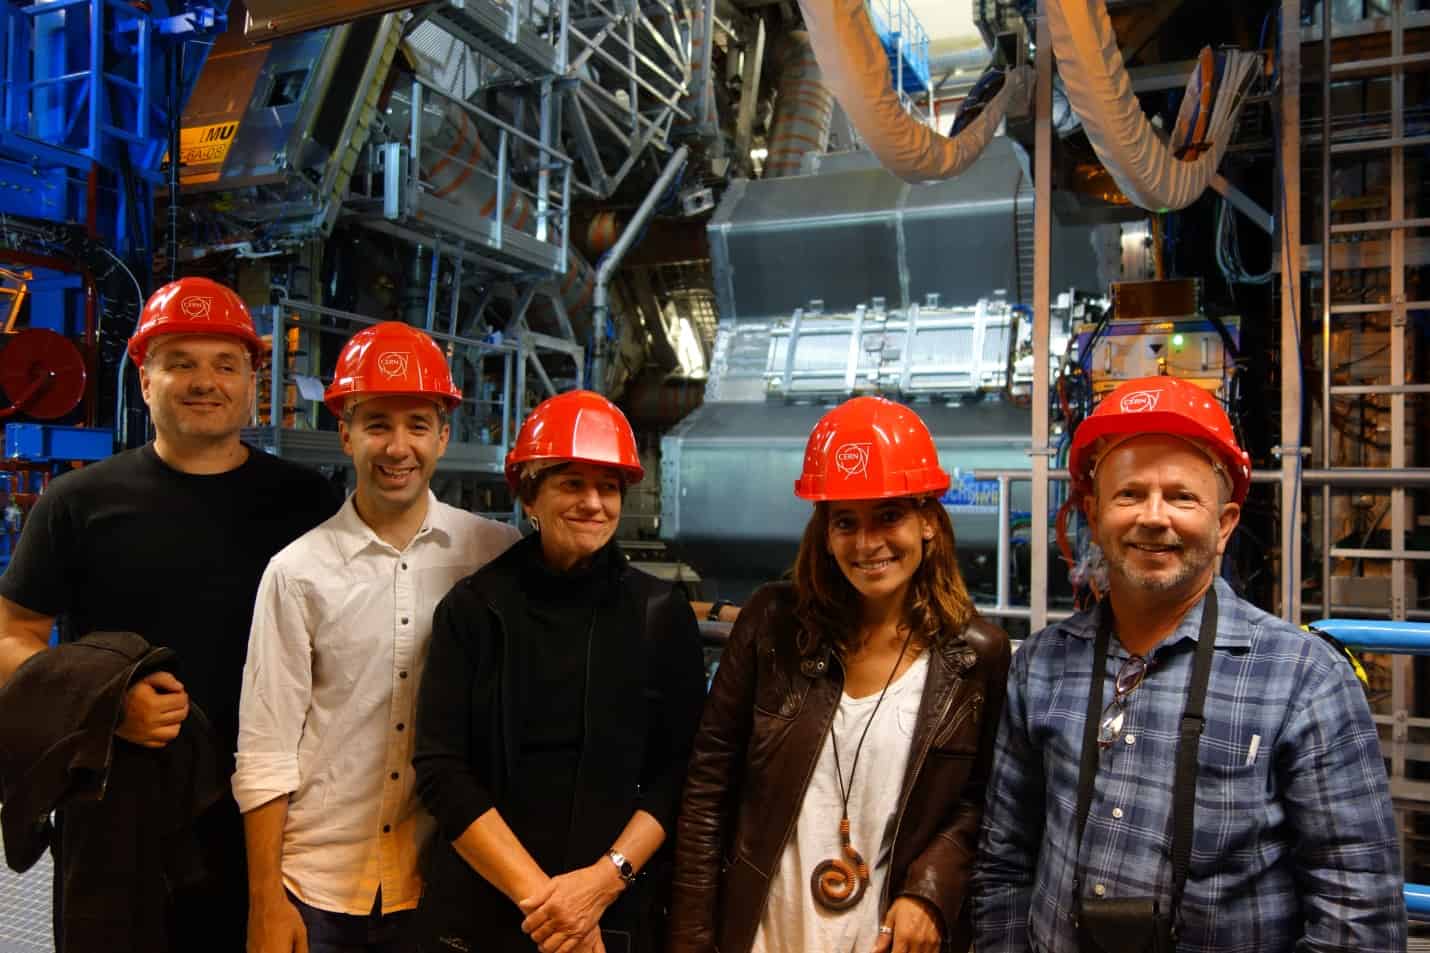 Behind-the-scenes with Brookhaven National Laboratory - Long